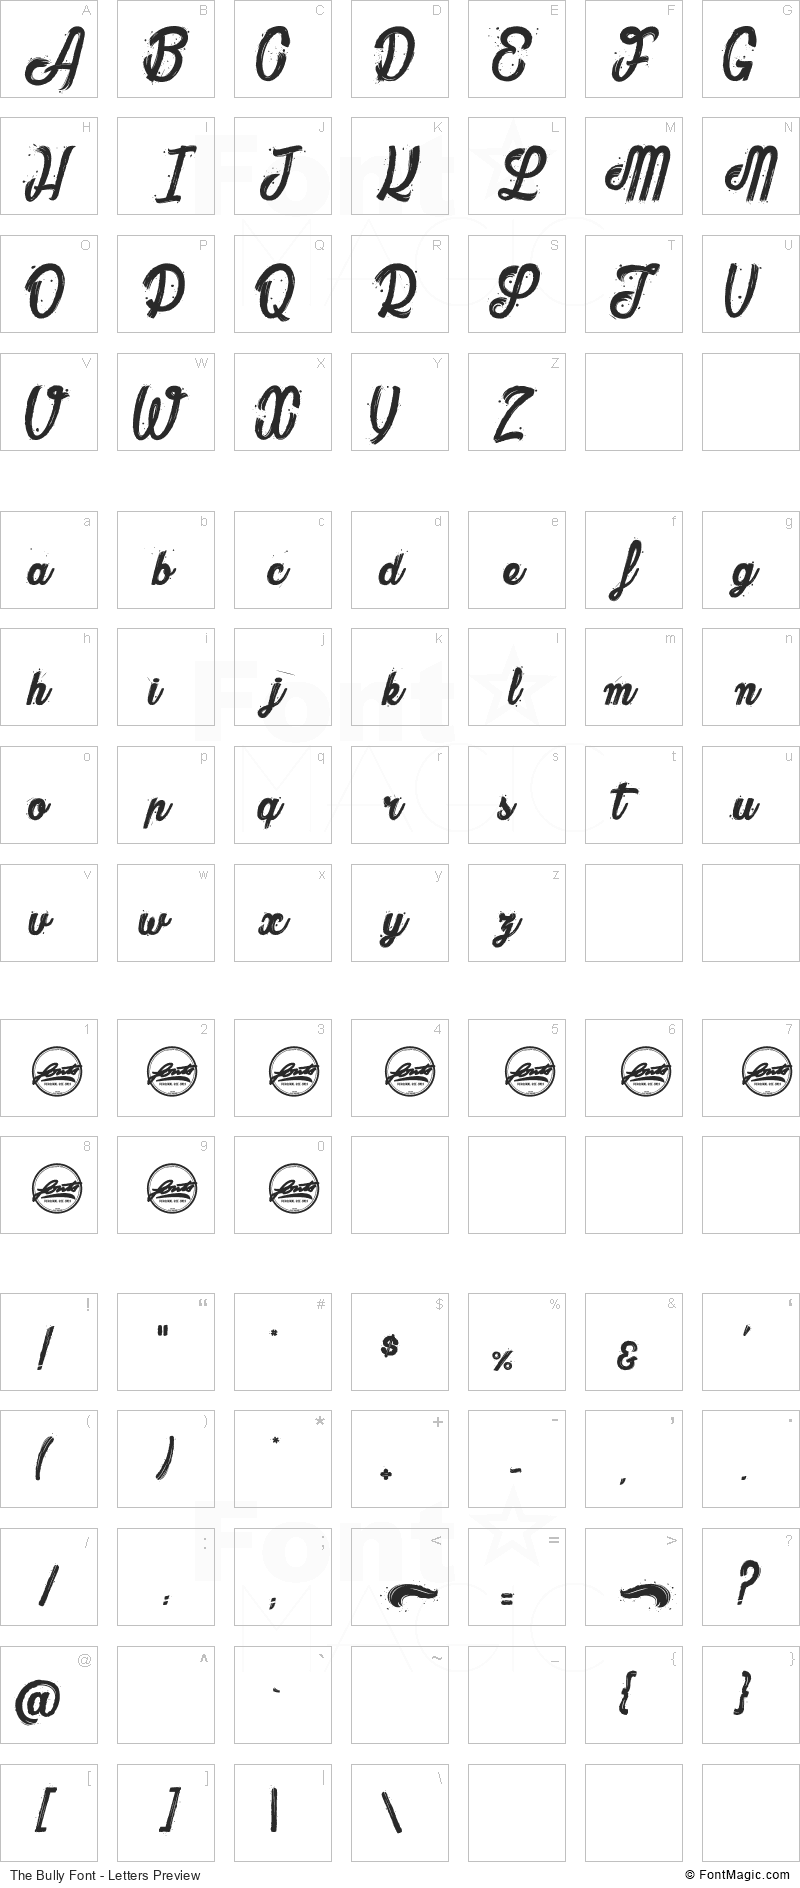 The Bully Font - All Latters Preview Chart